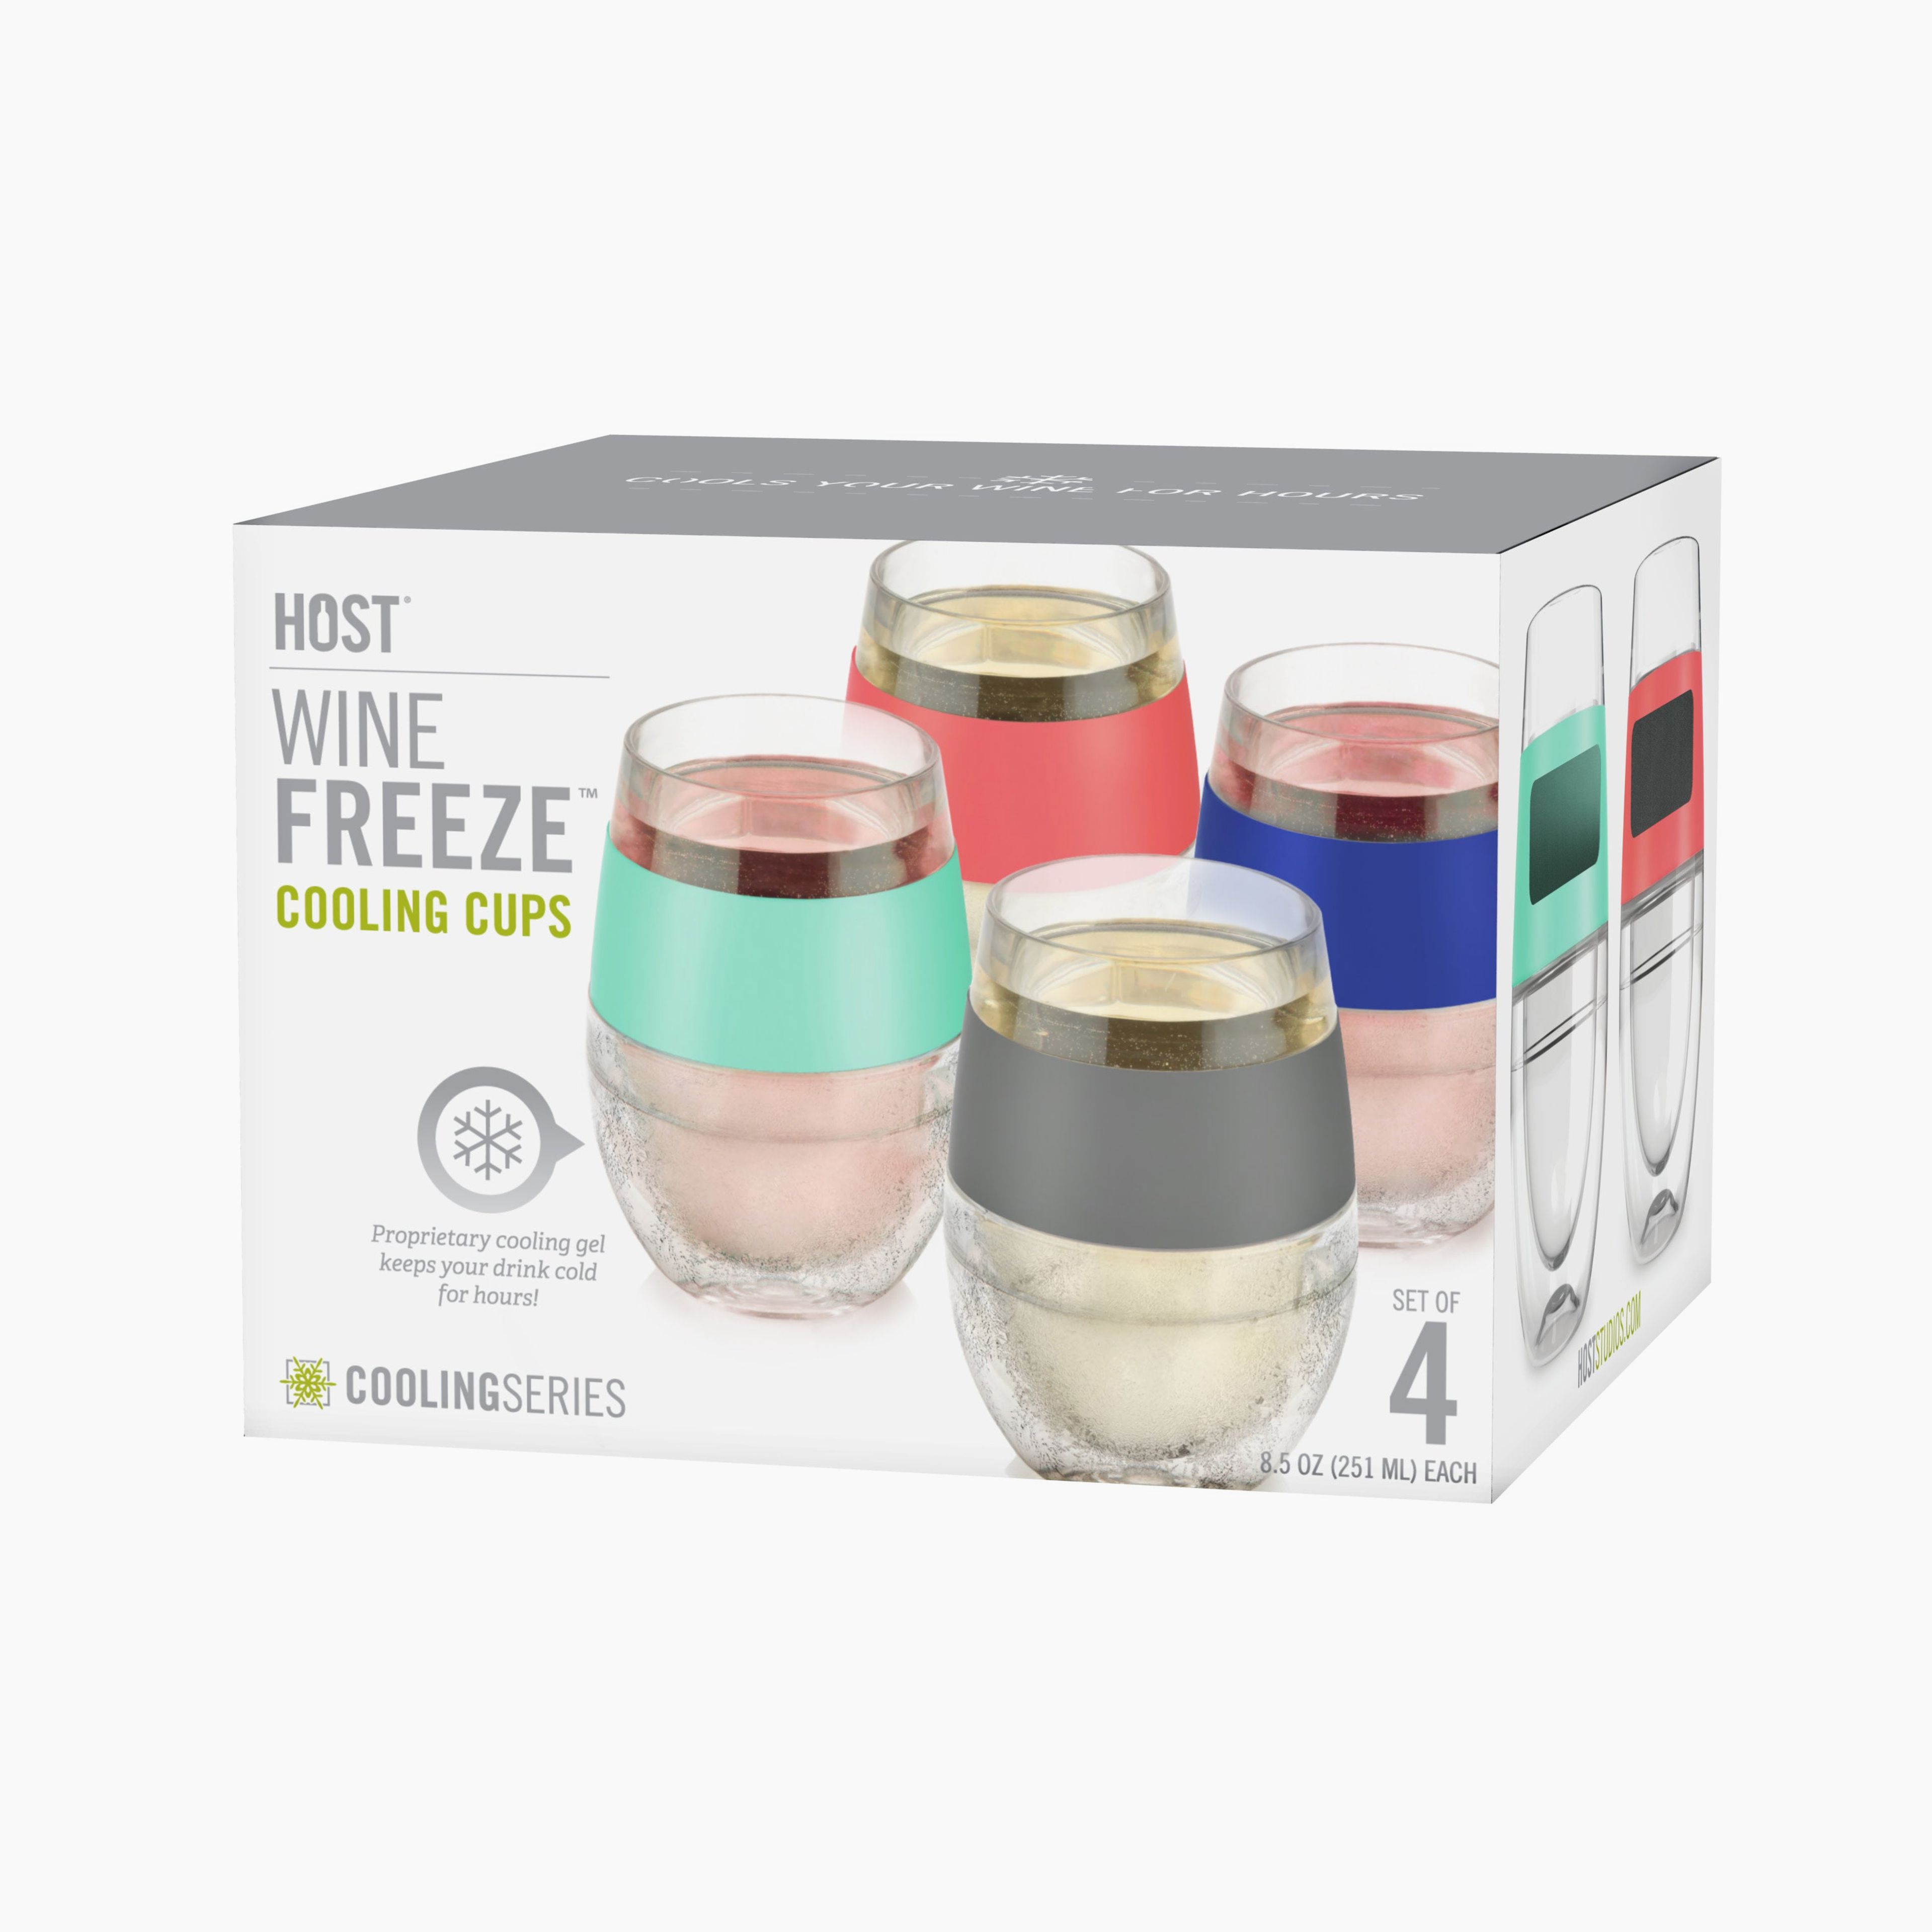 Wine FREEZE Cooling Cups in Multicolor, Set of 4